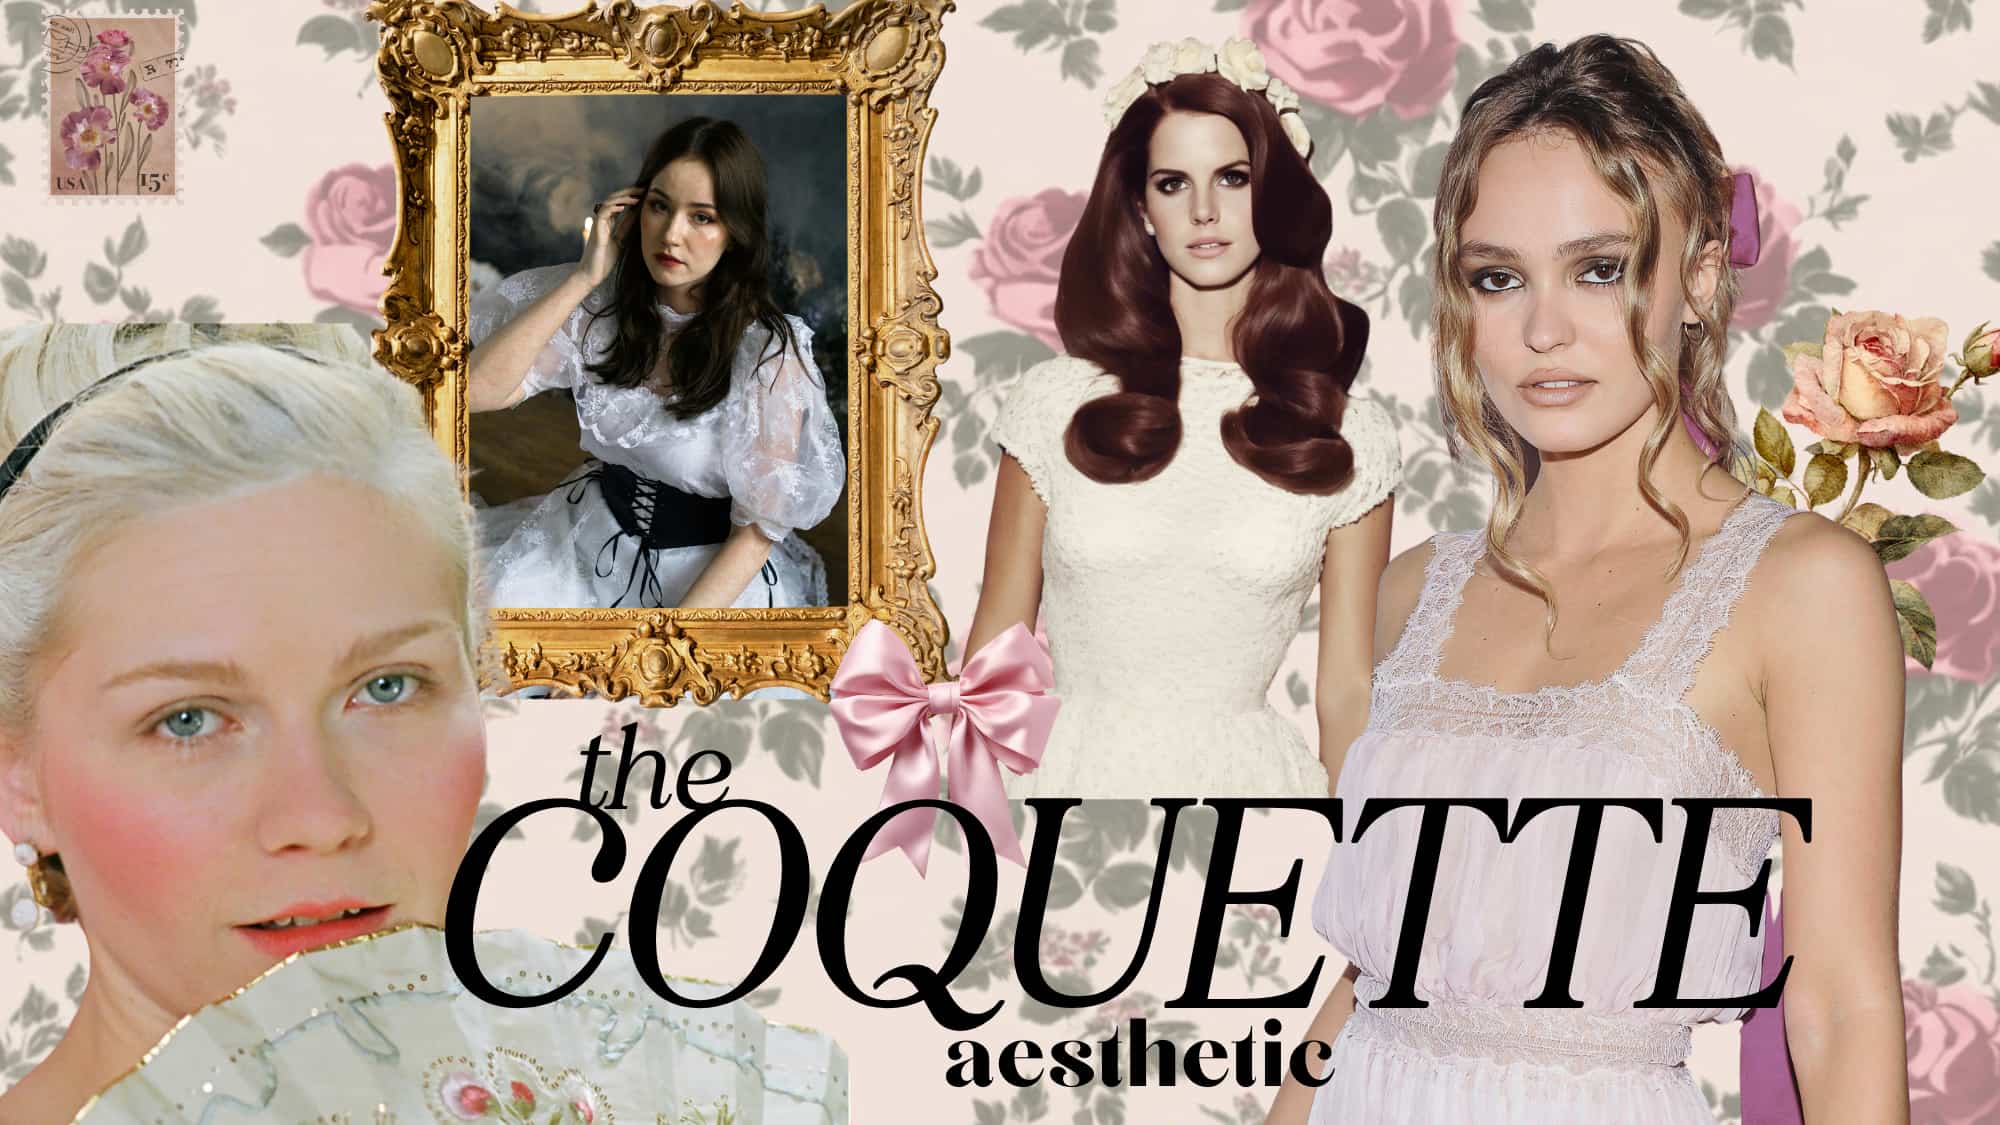 Flirting with Fashion? The Coquette Style Aestethic might just wink back ;)